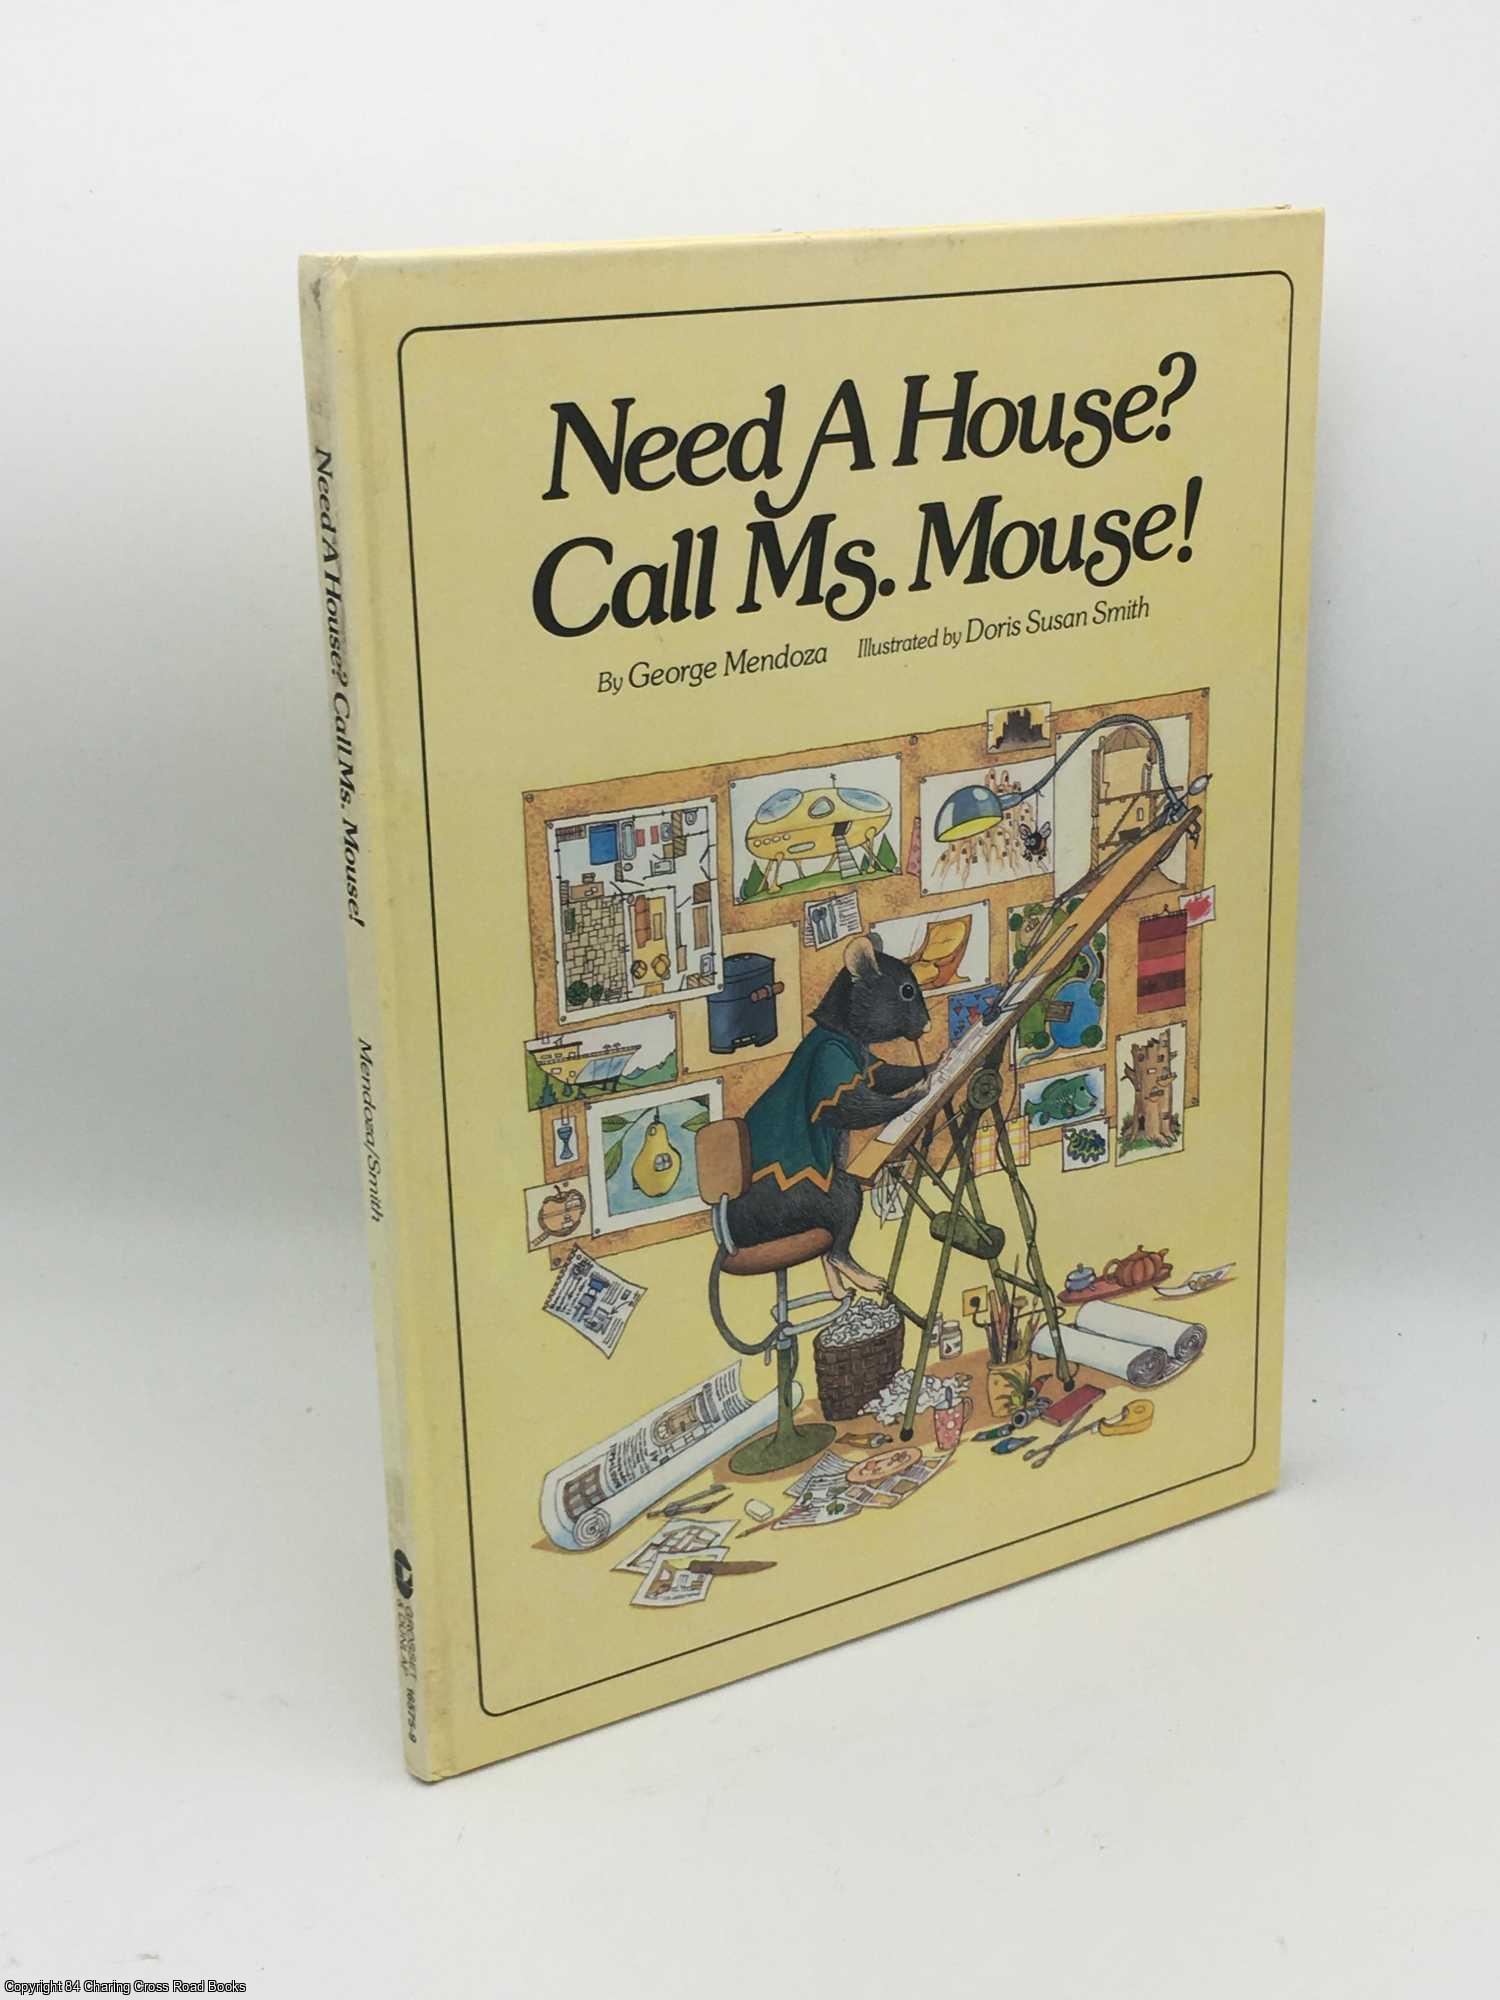 Mendoza, George - Need A House? Call Ms. Mouse!